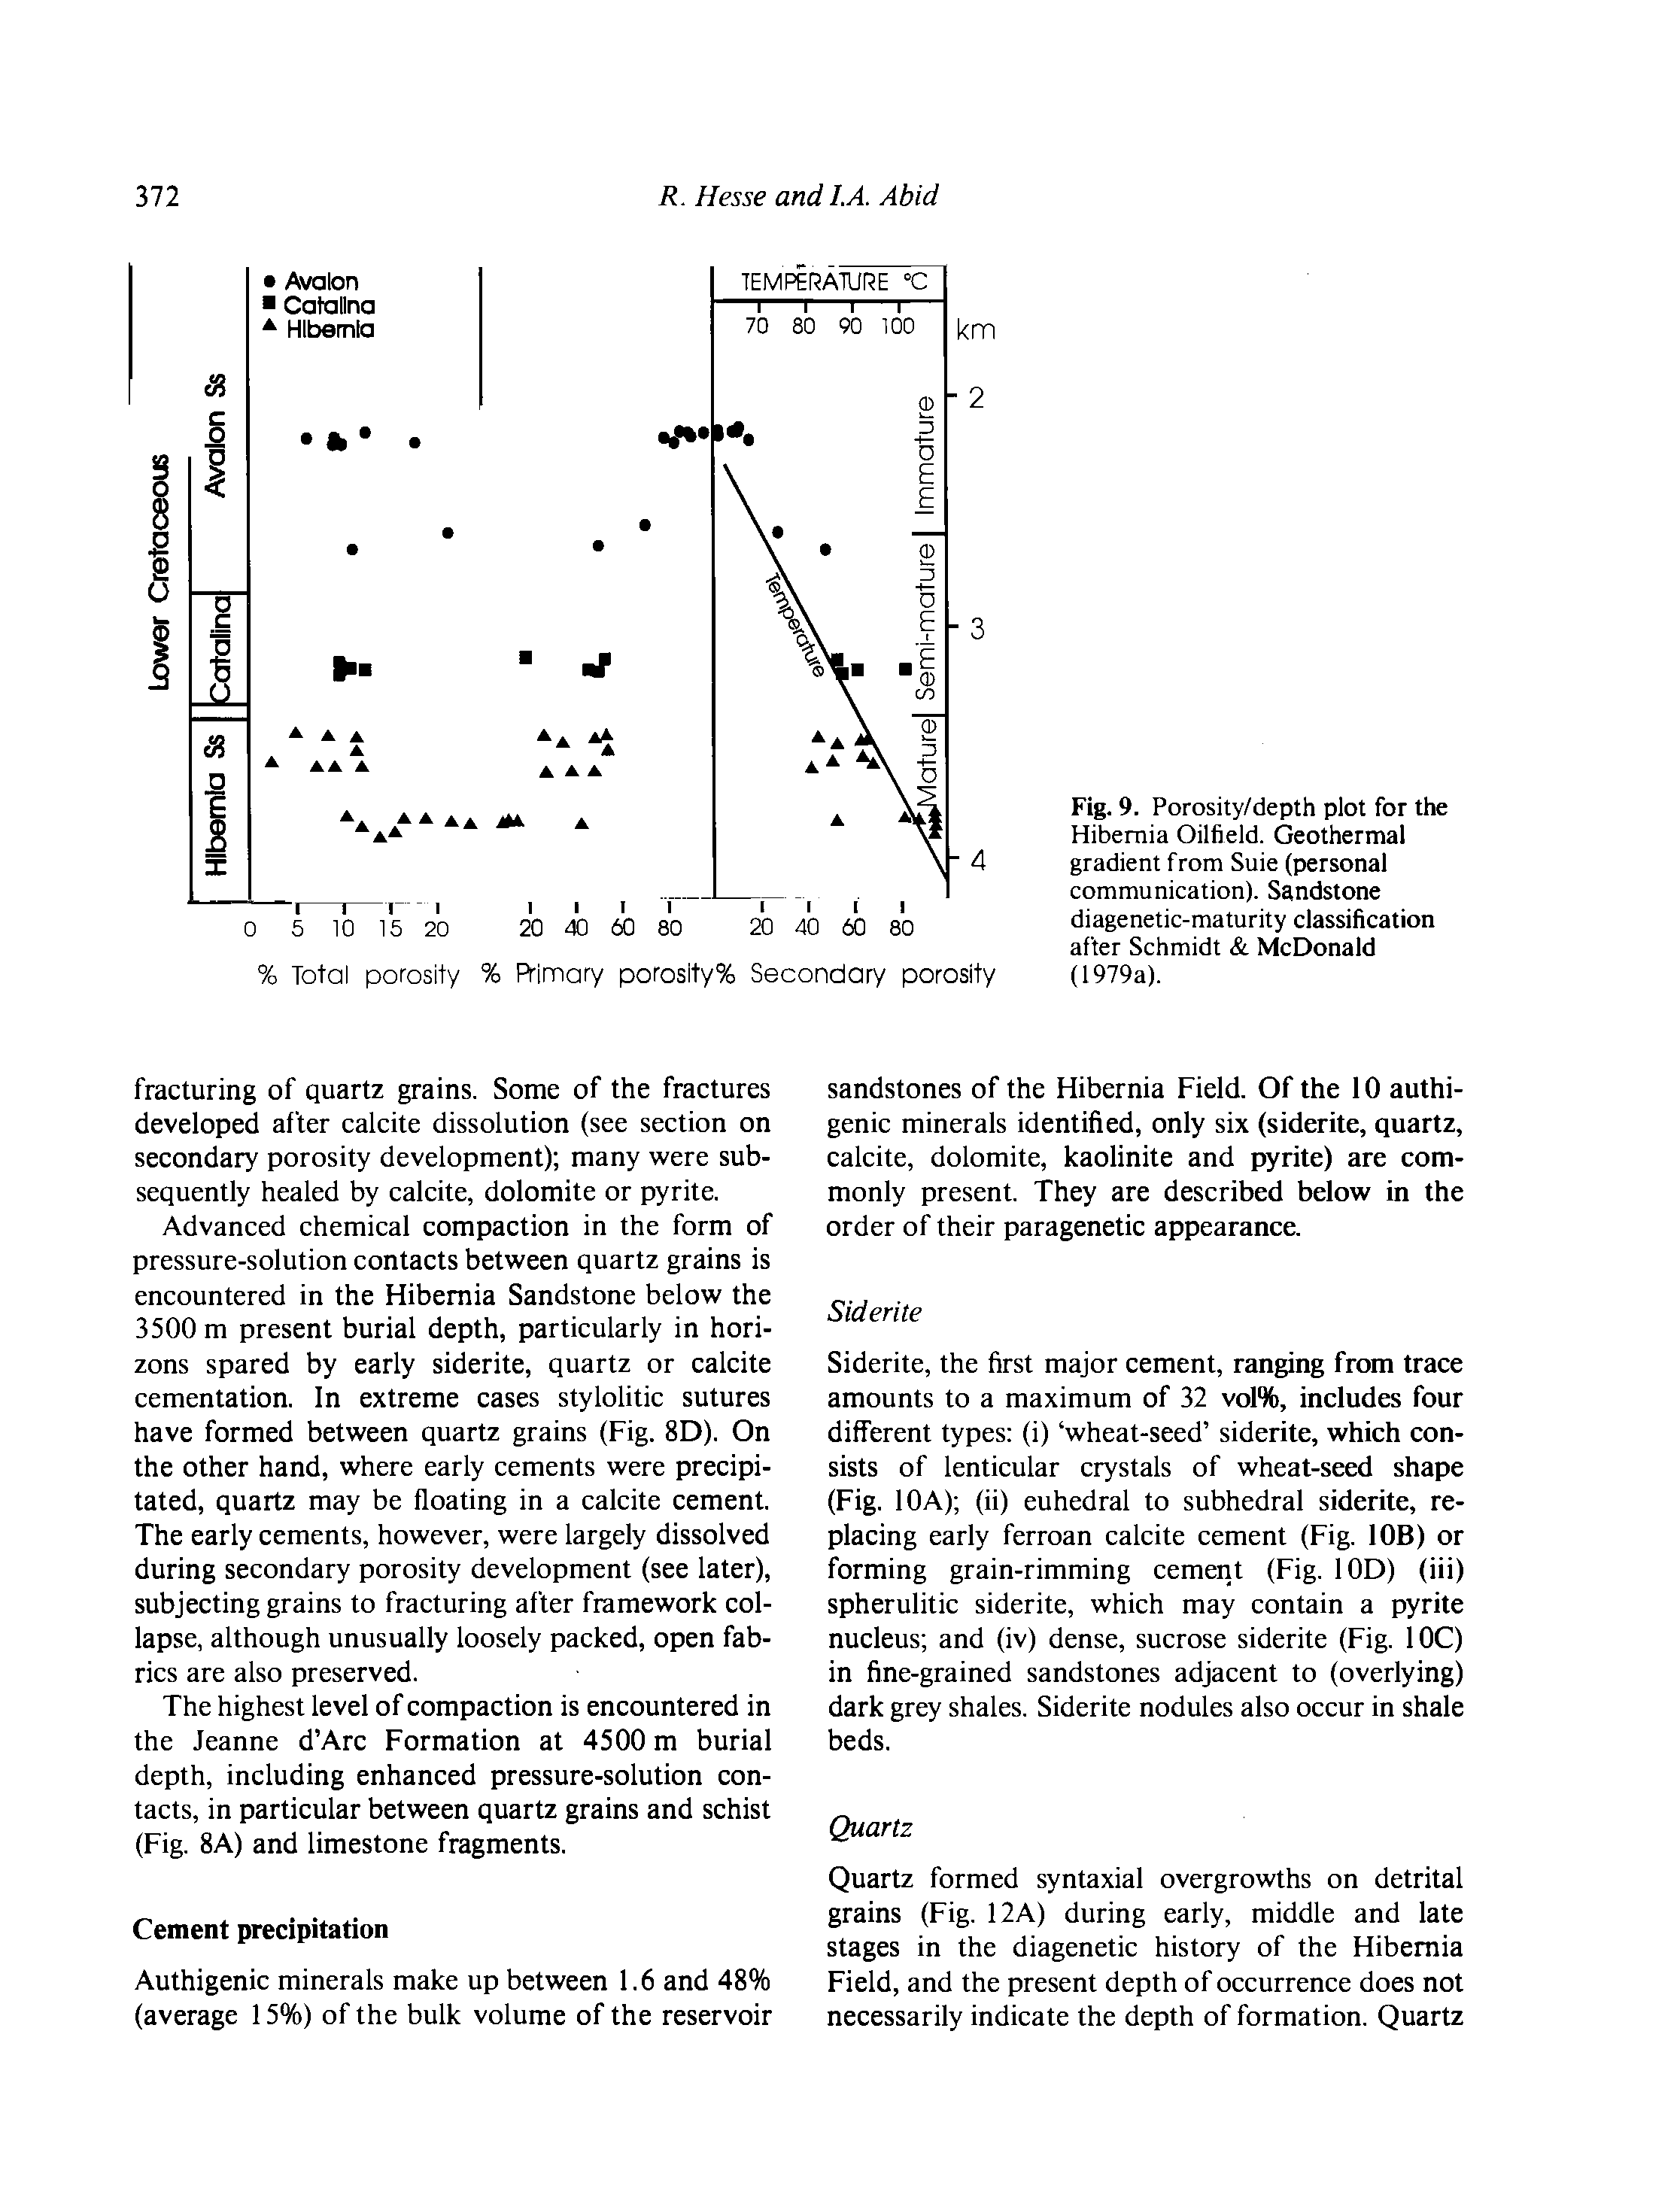 Fig. 9. Porosity/depth plot for the Hibernia Oilfield. Geothermal gradient from Suie (personal communication). Sandstone diagenetic-maturity classification after Schmidt McDonald (1979a).